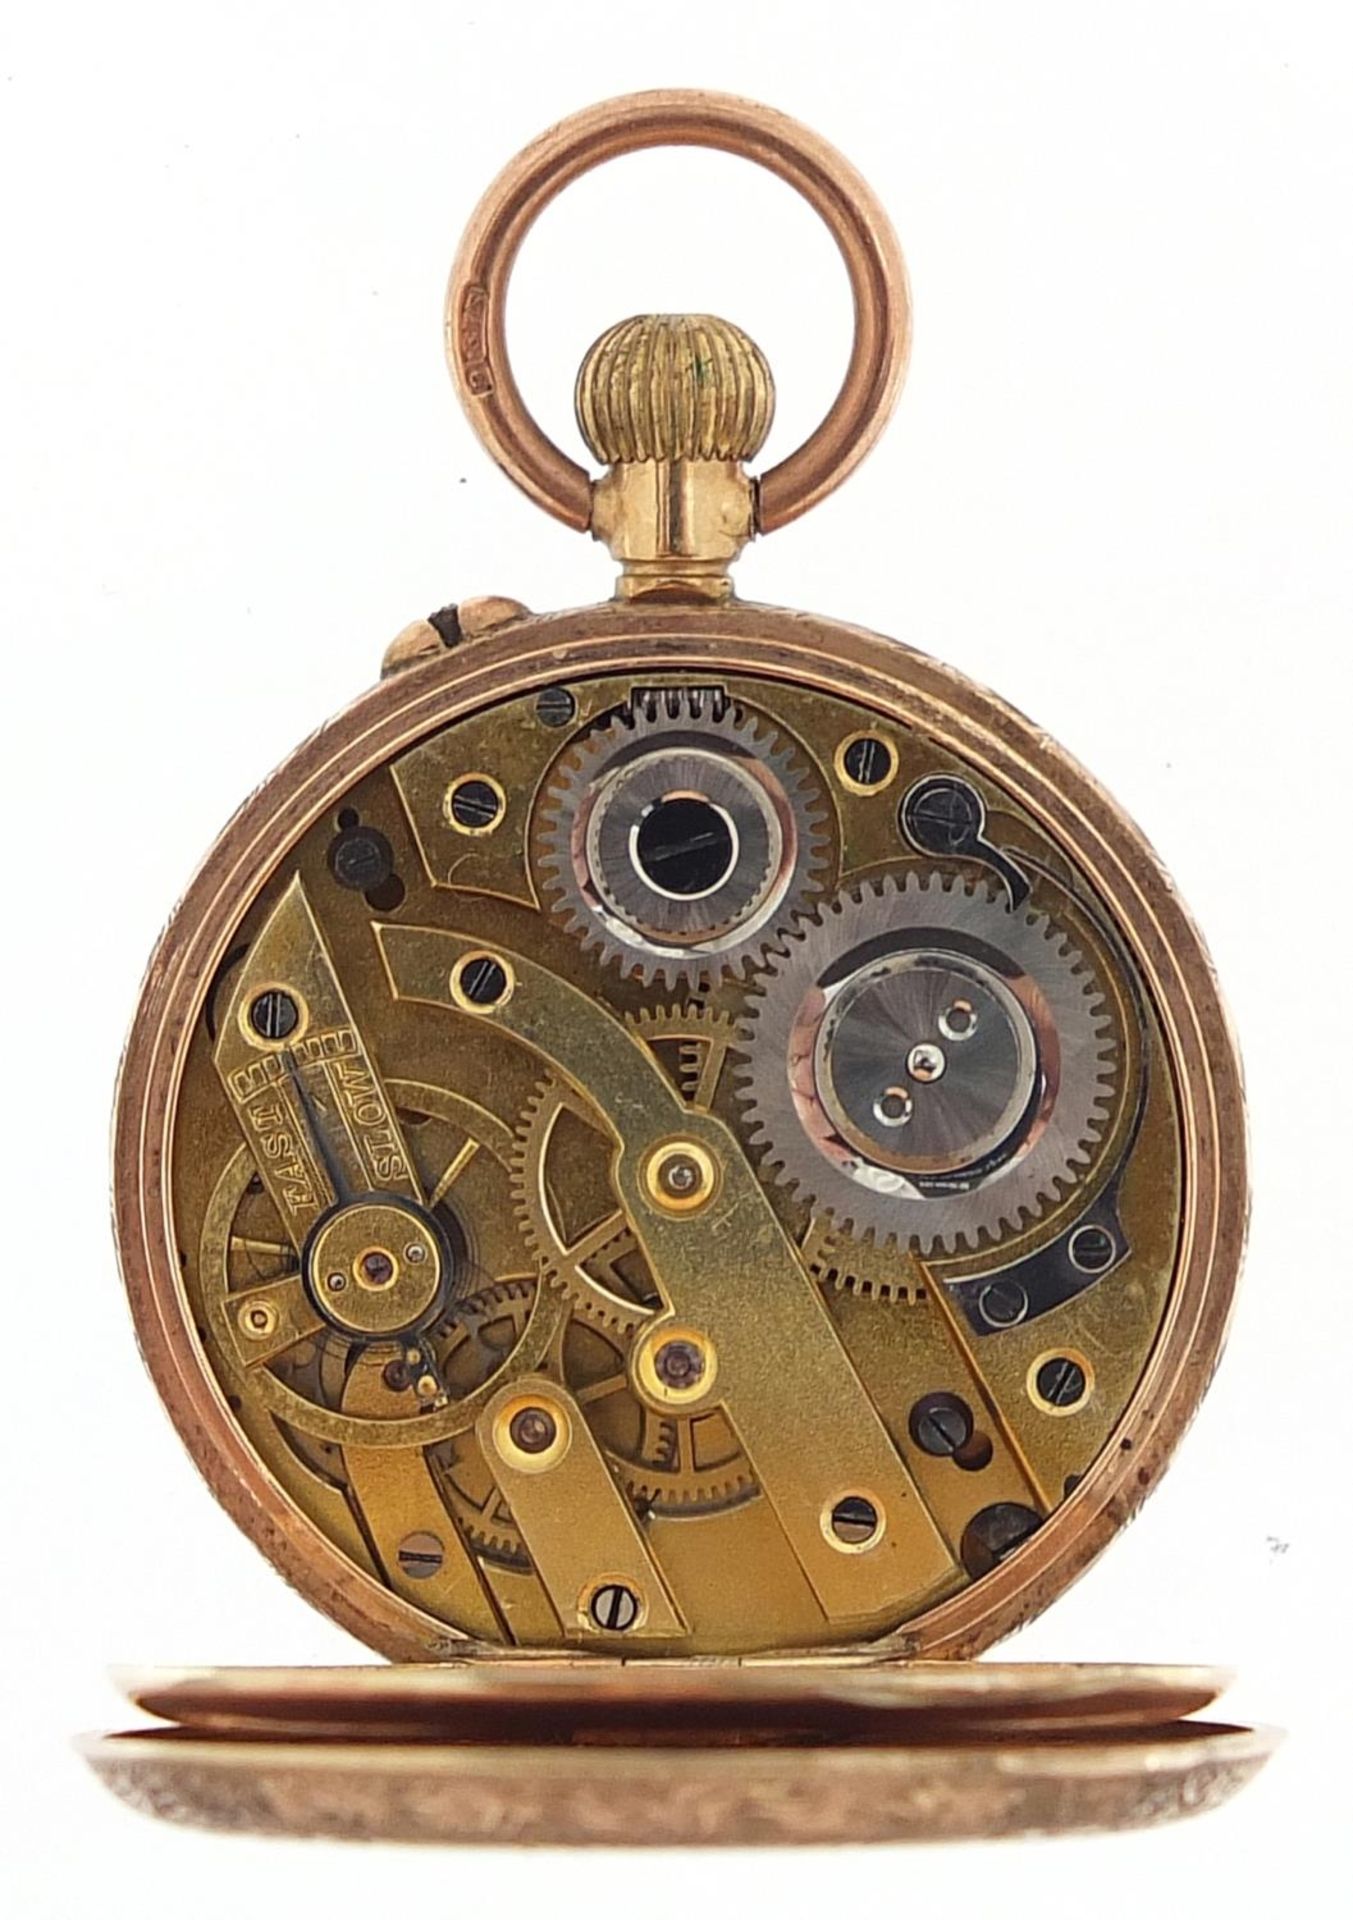 Ladies 9ct rose gold pocket watch with ornate dial, 32mm in diameter, 22.5g - Image 3 of 5